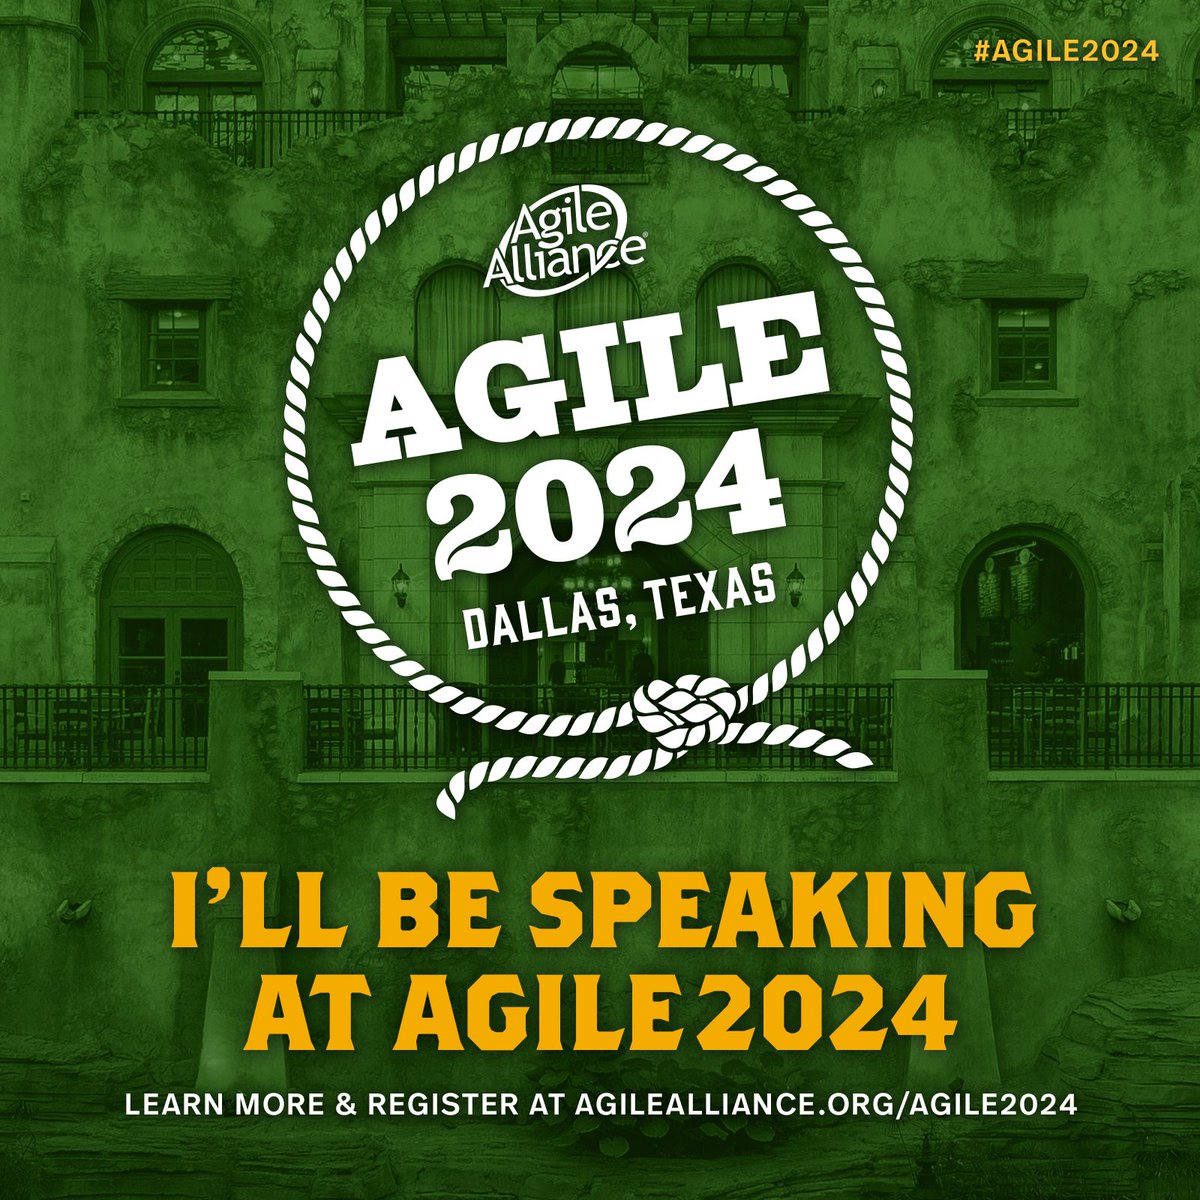 I might be at #RSAC today, but I am alreay looking forward to next July when I am speaking at #Agile2024 If you are in Texas, the time is now to get your ticket! buff.ly/3UREdgN